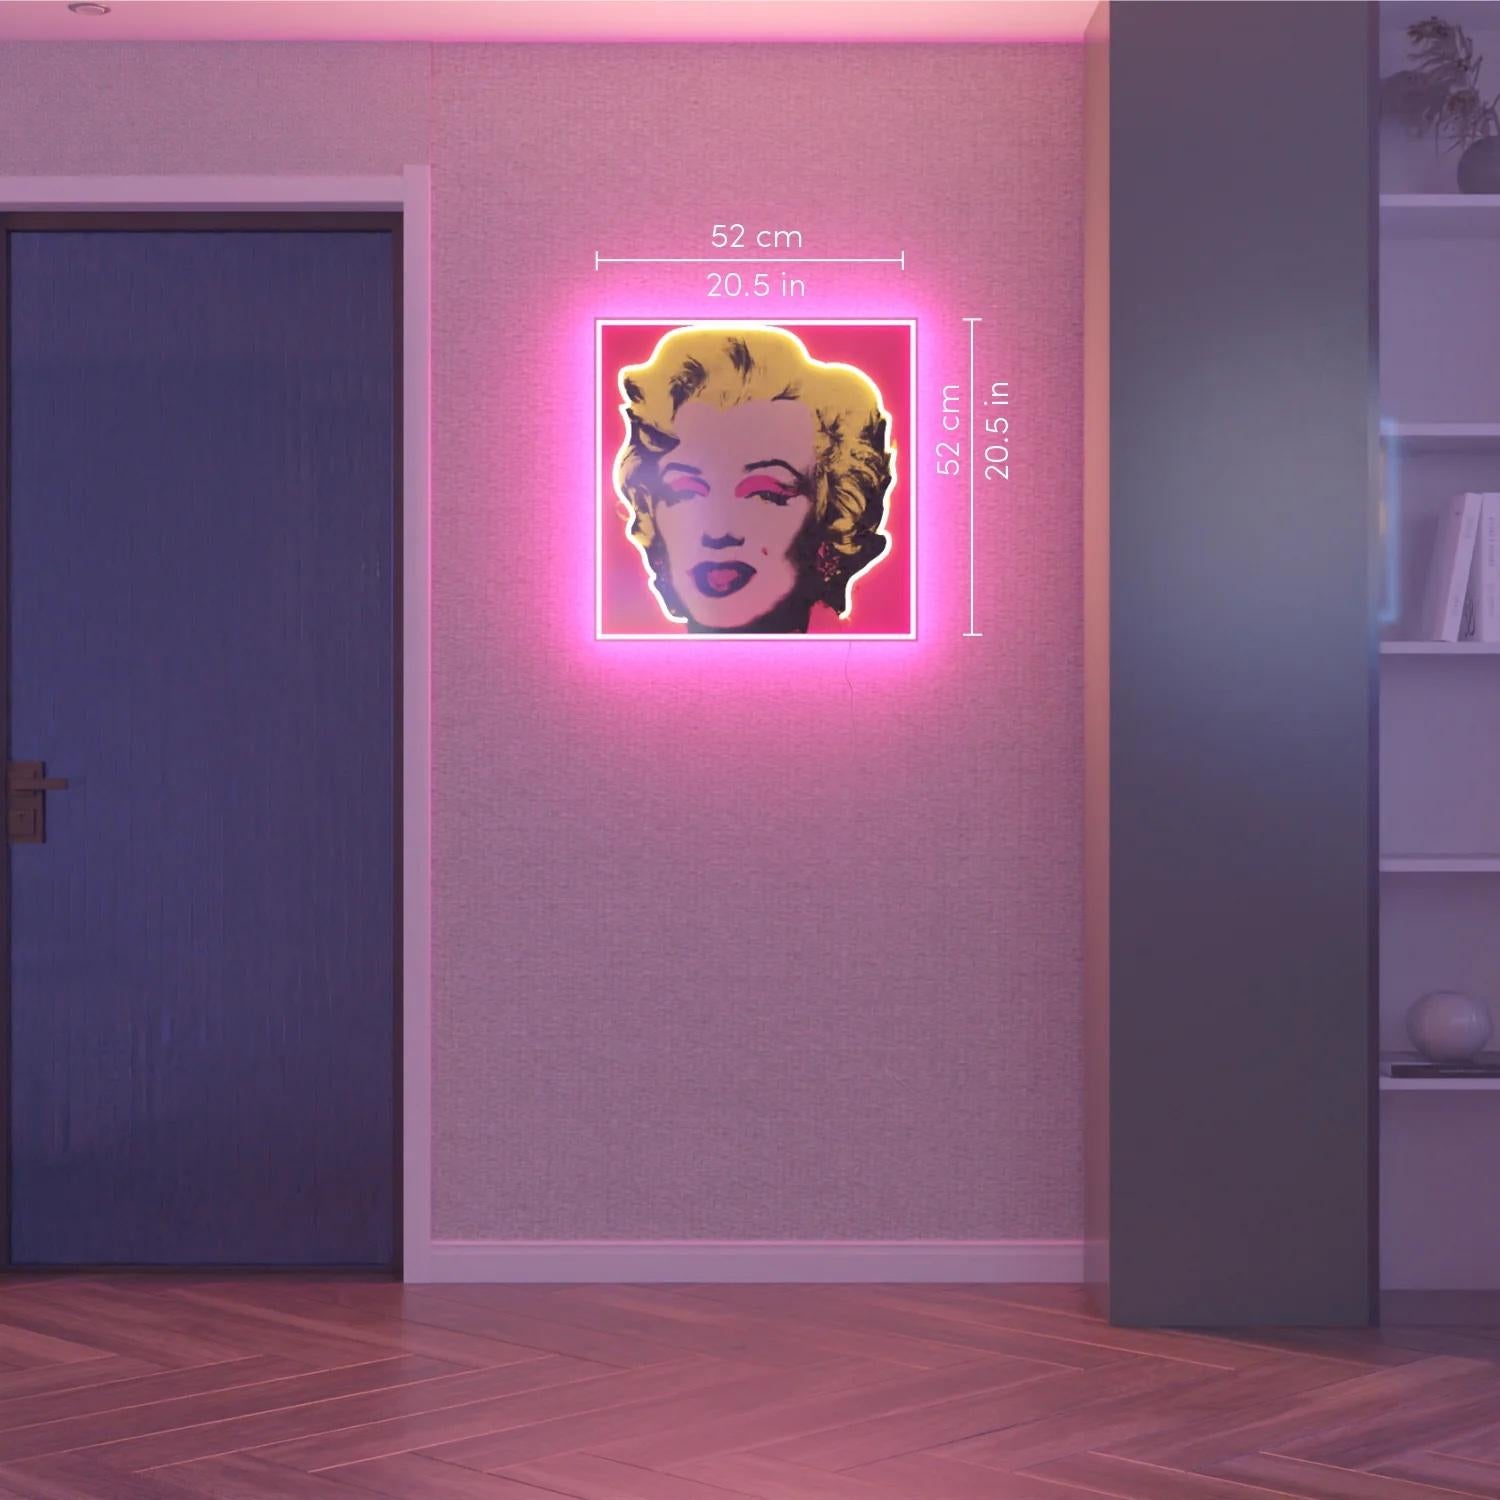 Marilyn Monroe (Pink) Limited Edition Neon Wall Hanging Foundation Authorized - Pop Art Print by Andy Warhol